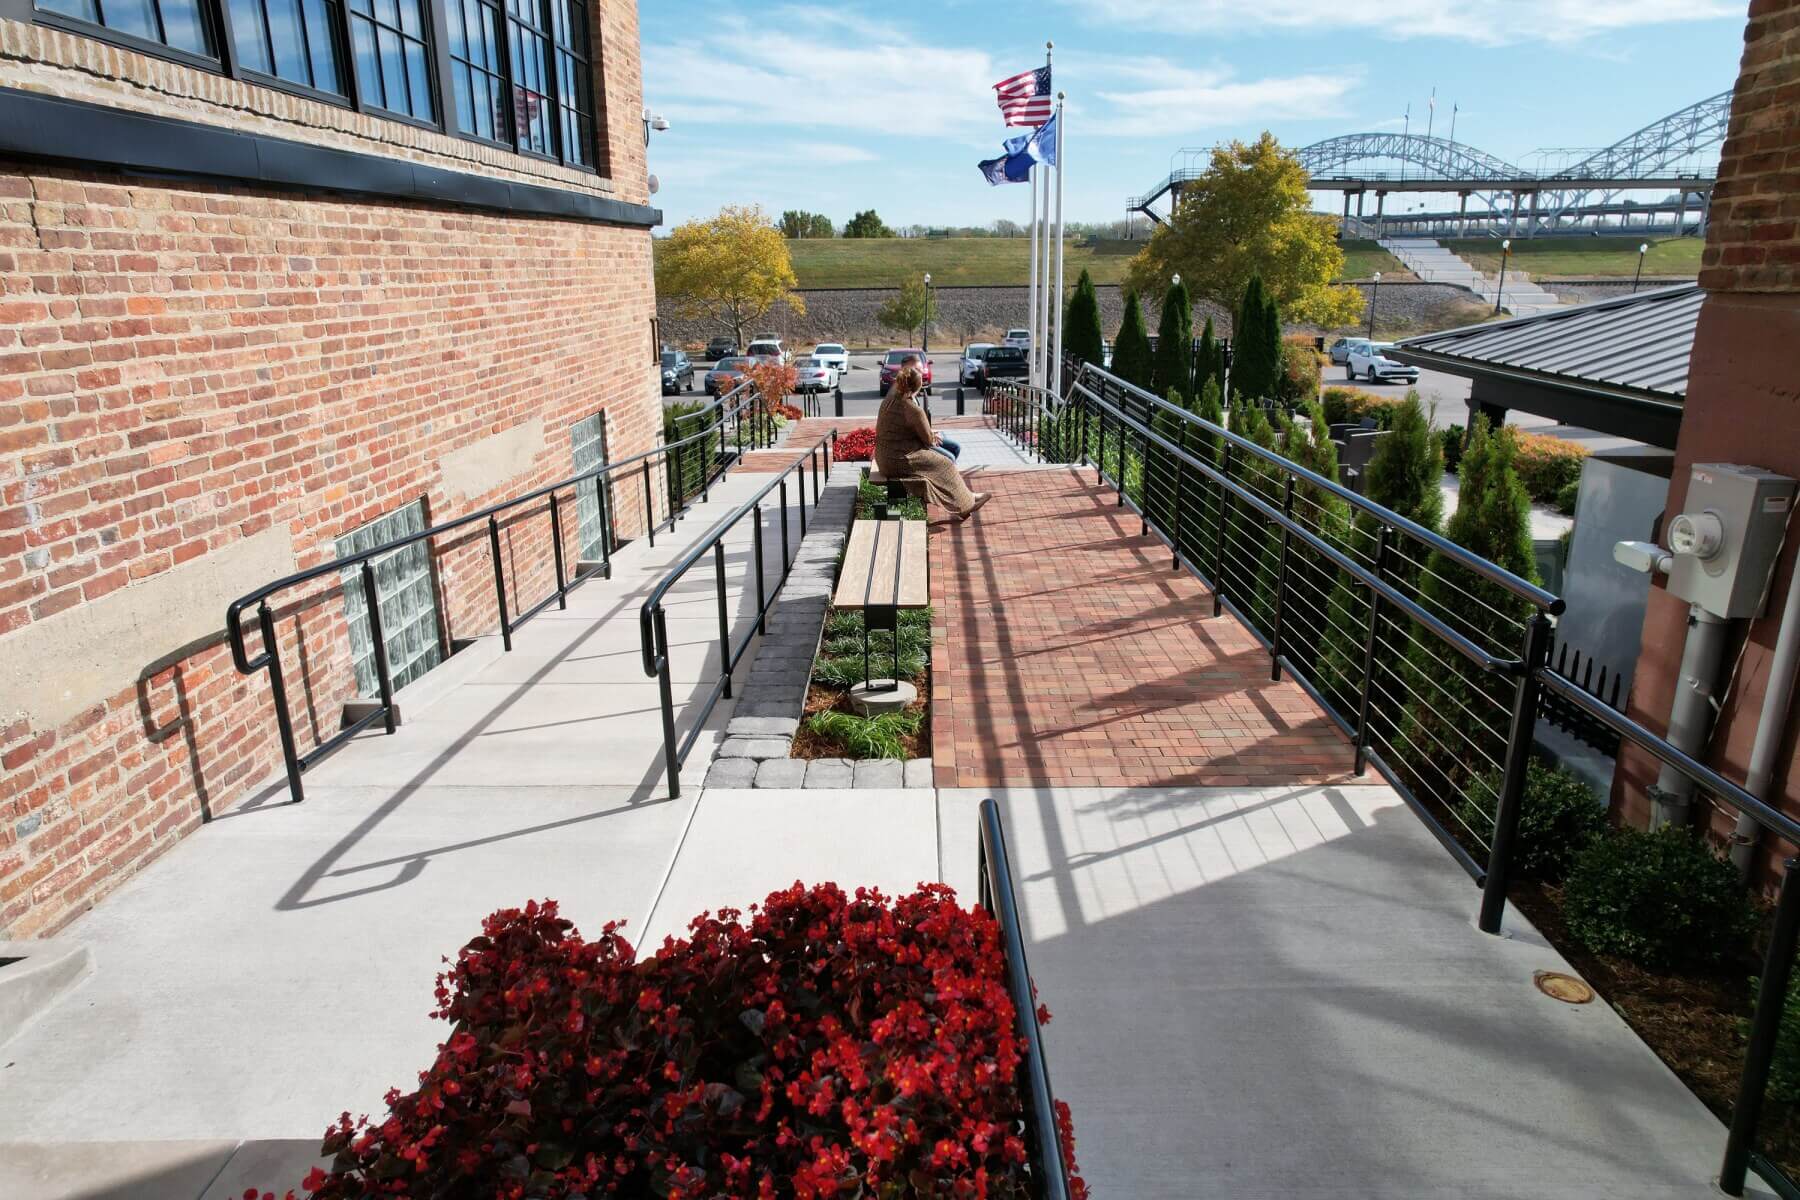 New Albany City Hall Promenade and Plaza alleyway, ramp and benches